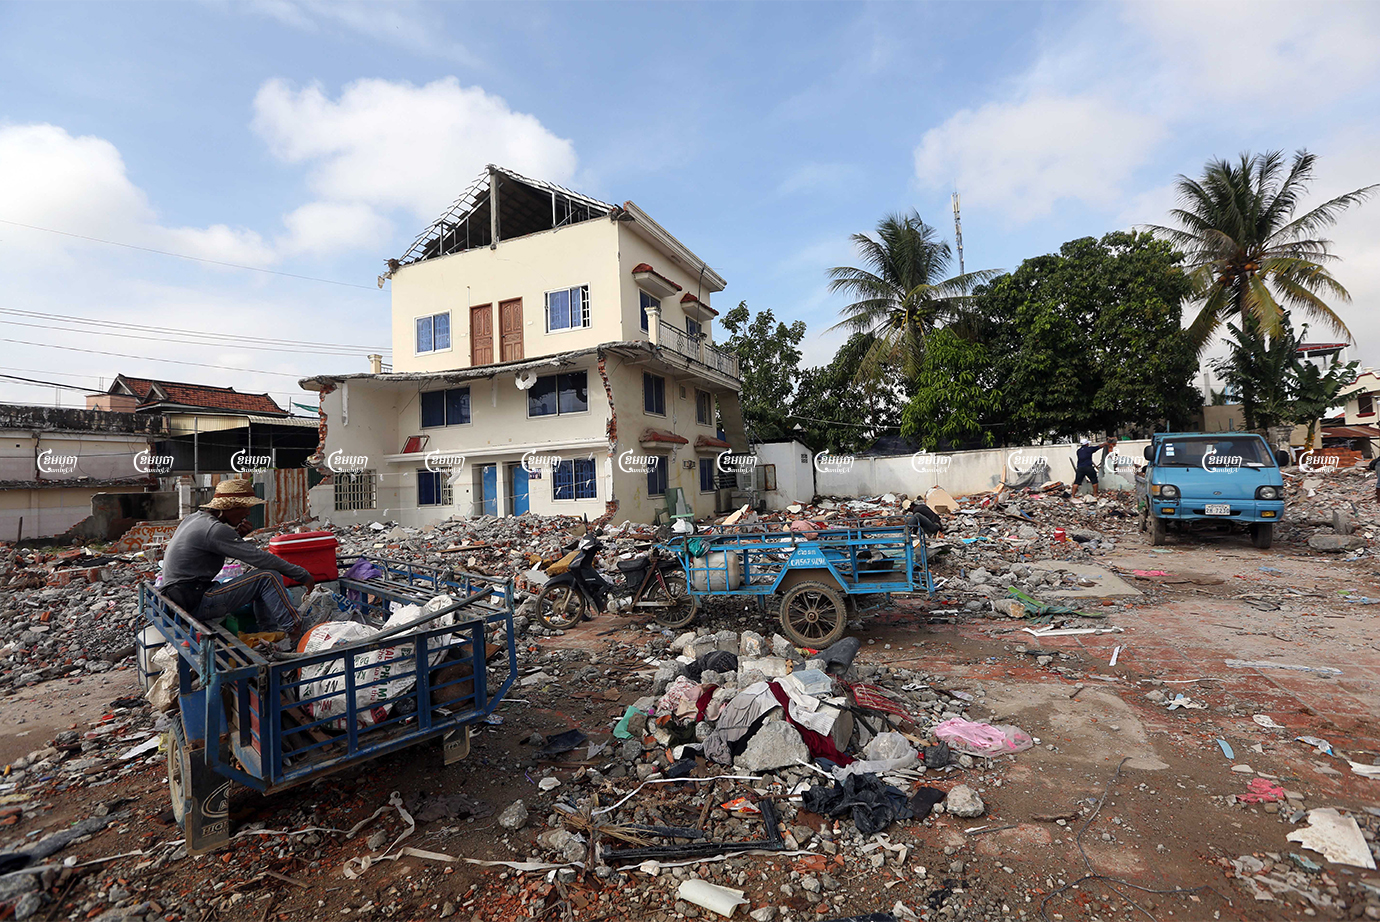 Workers collect scrap from a demolished house in the Pur Senhey district of Phnom Penh, November 2, 2021. CamboJA/ Pring Samrang